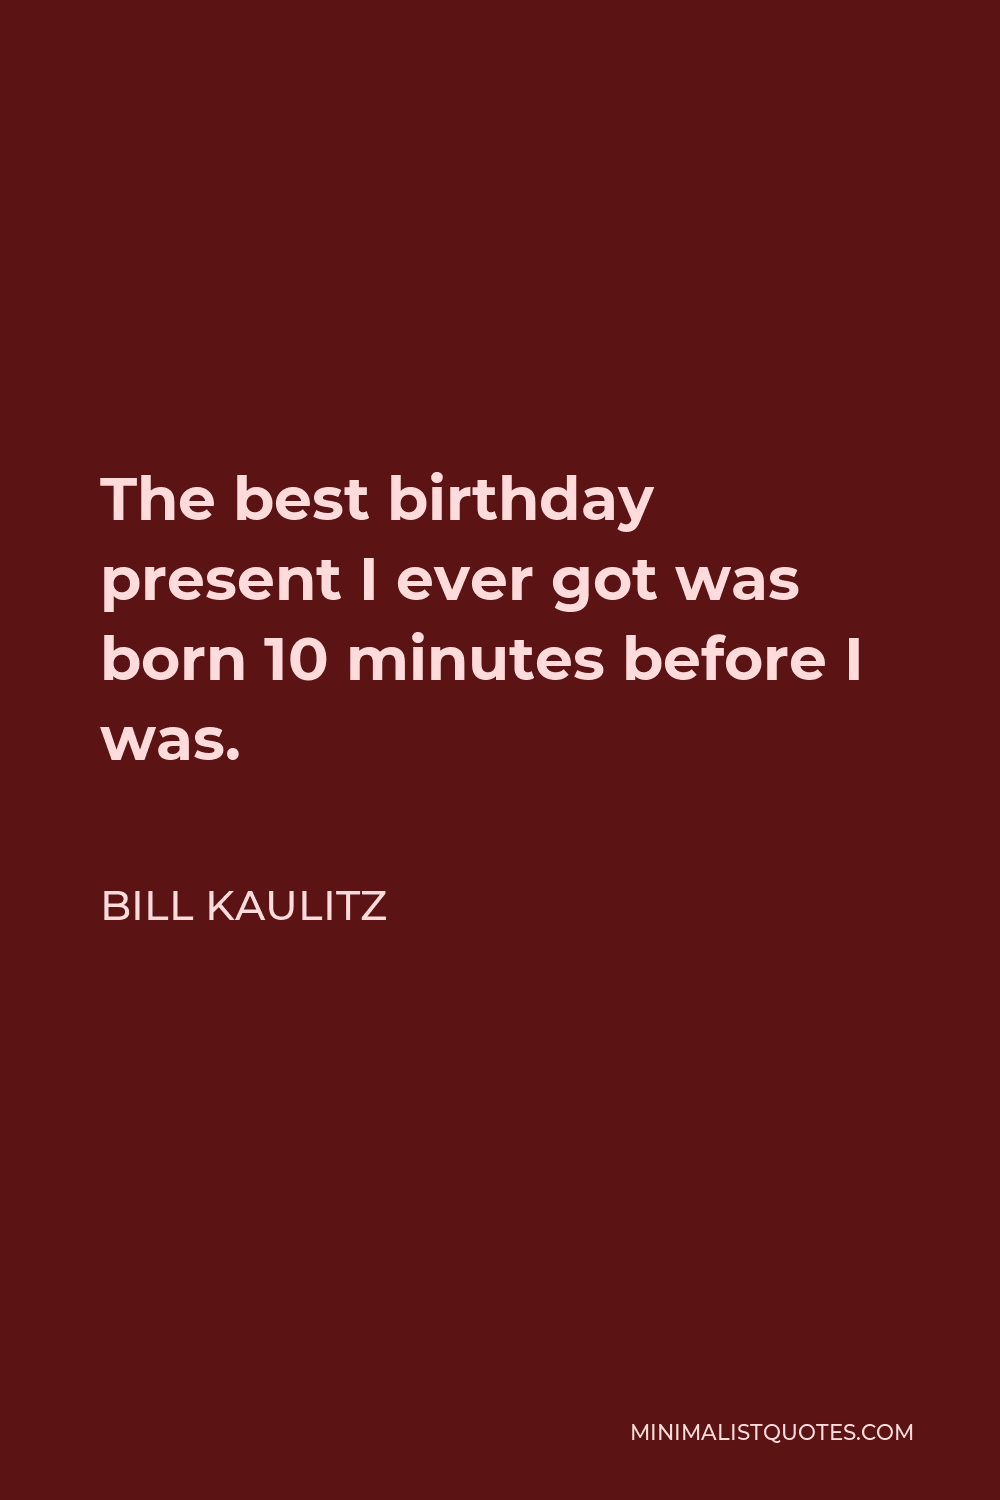 Bill Kaulitz Quote - The best birthday present I ever got was born 10 minutes before I was.